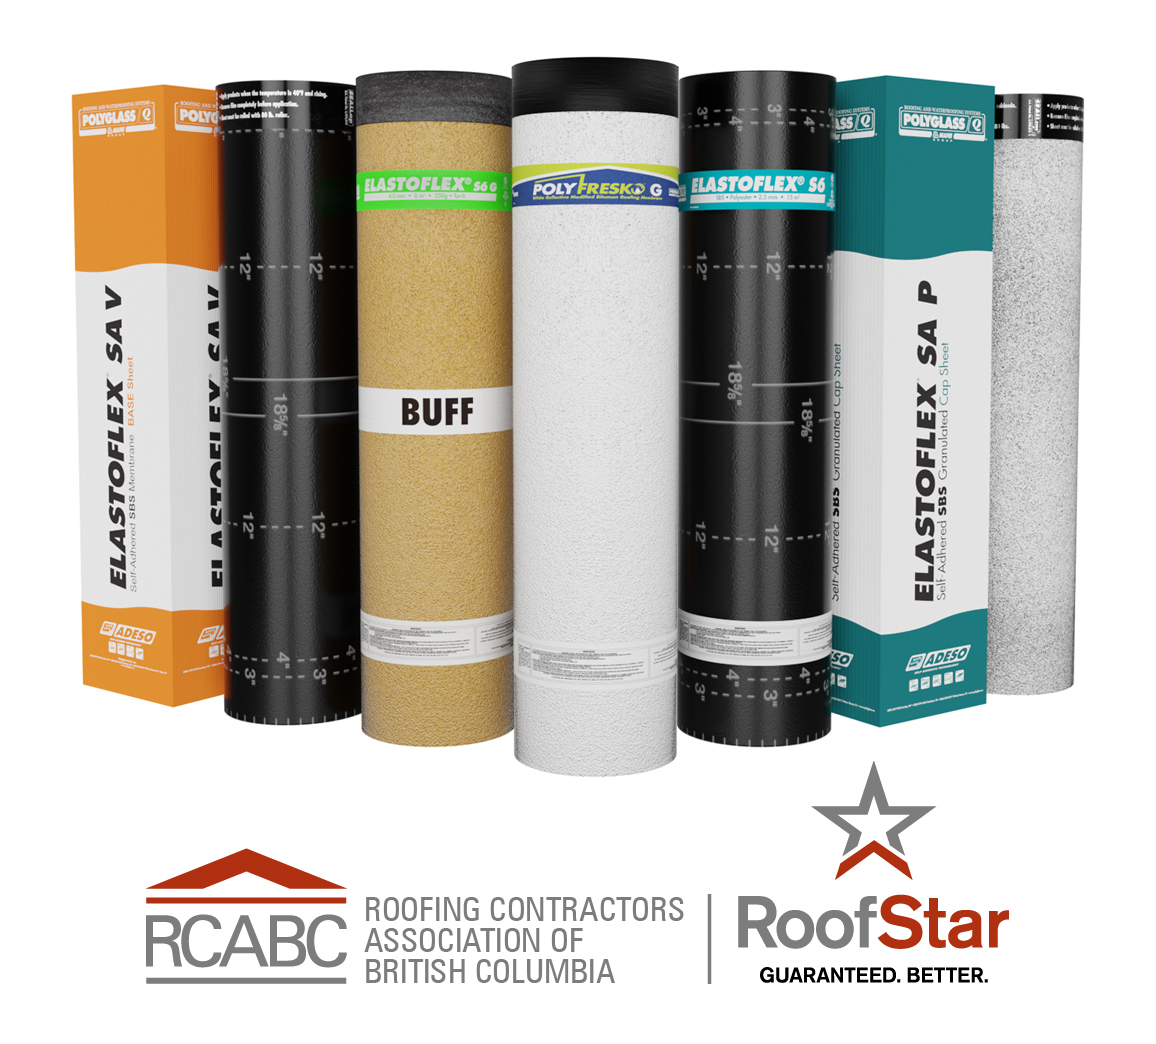 May - ProdSvc - Polyglass - Canadian Association Adds Polyglass Solutions to its Roof Guarantee Program